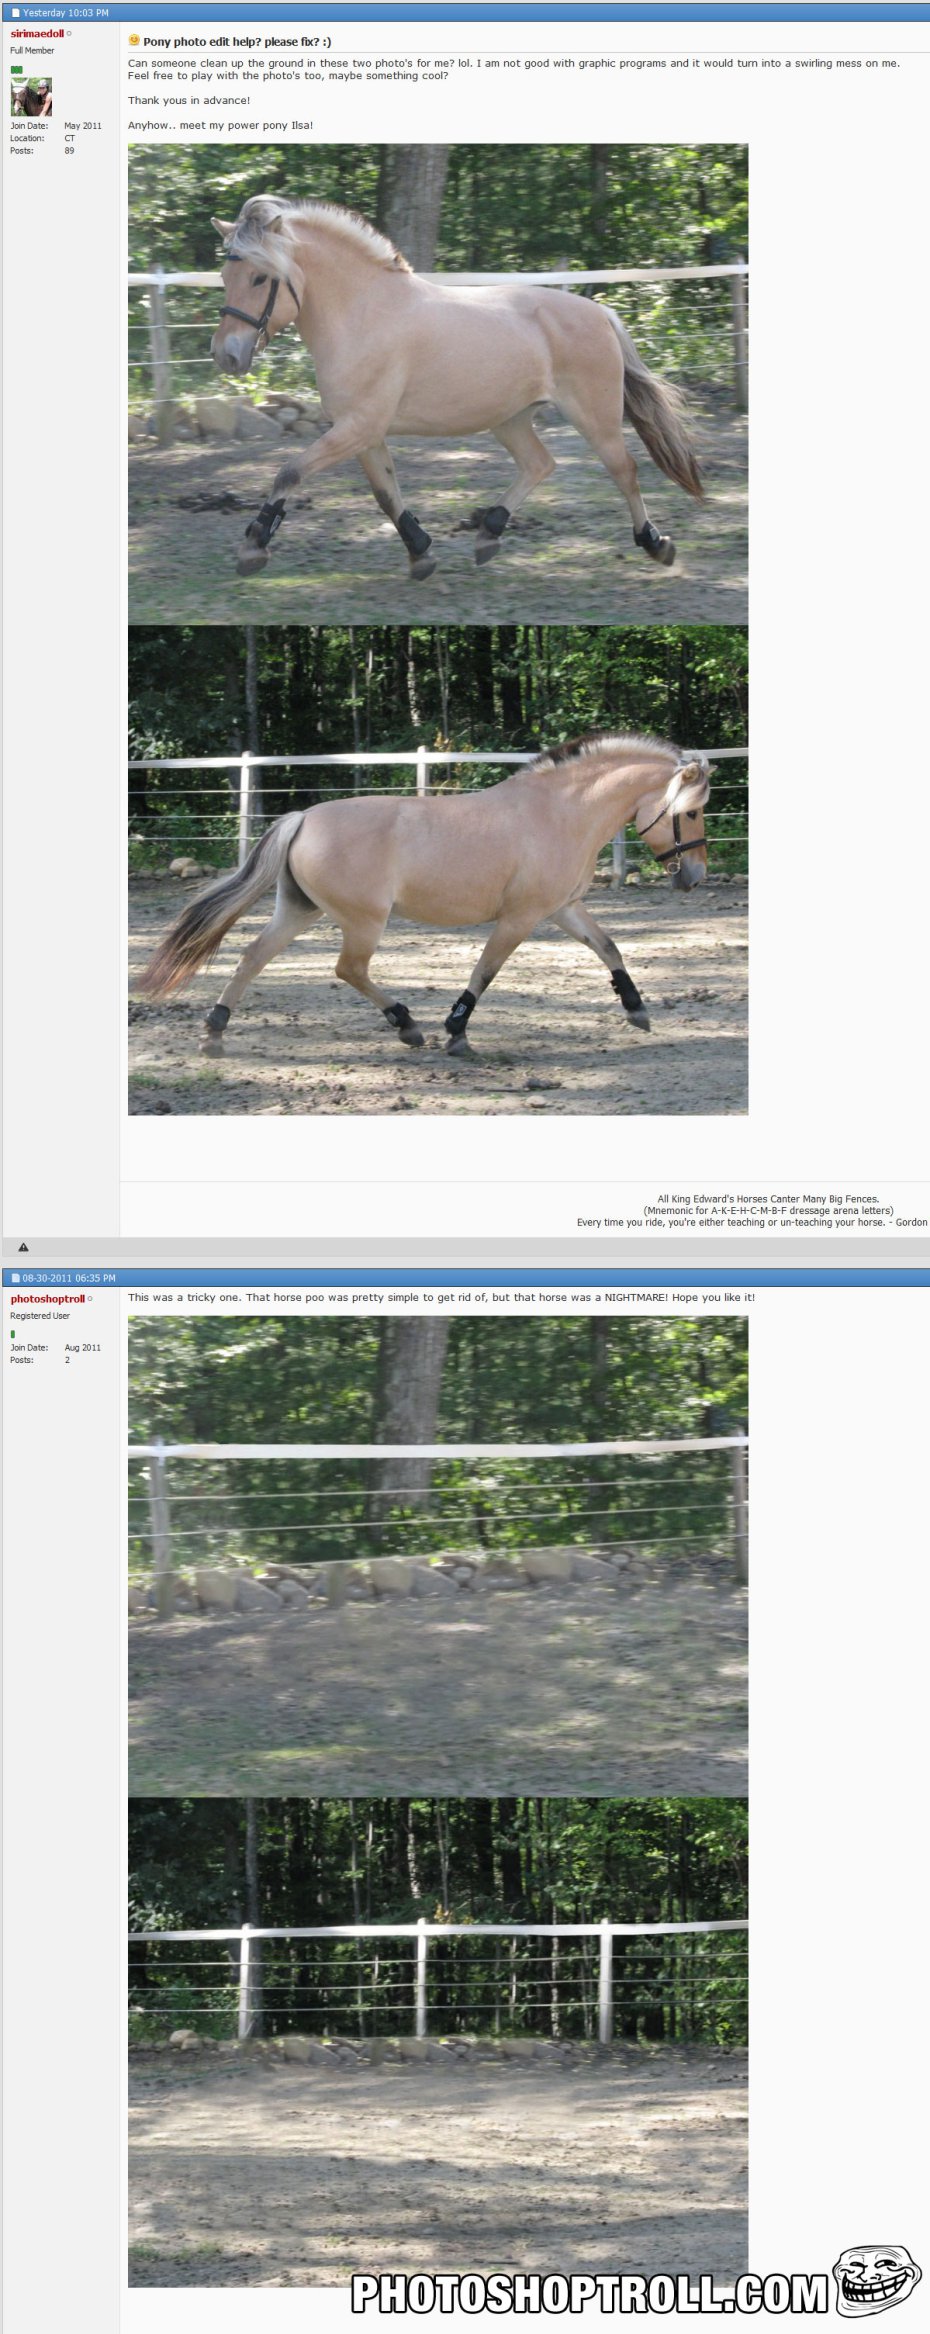 wildlife - Yesterday Sirimaedoll Full Member Pony photo edit help? please fix? Can someone clean up the ground in these two photo's for me? lol. I am not good with graphic programs and it would turn into a swirling mess on me. Feel free to play with the p